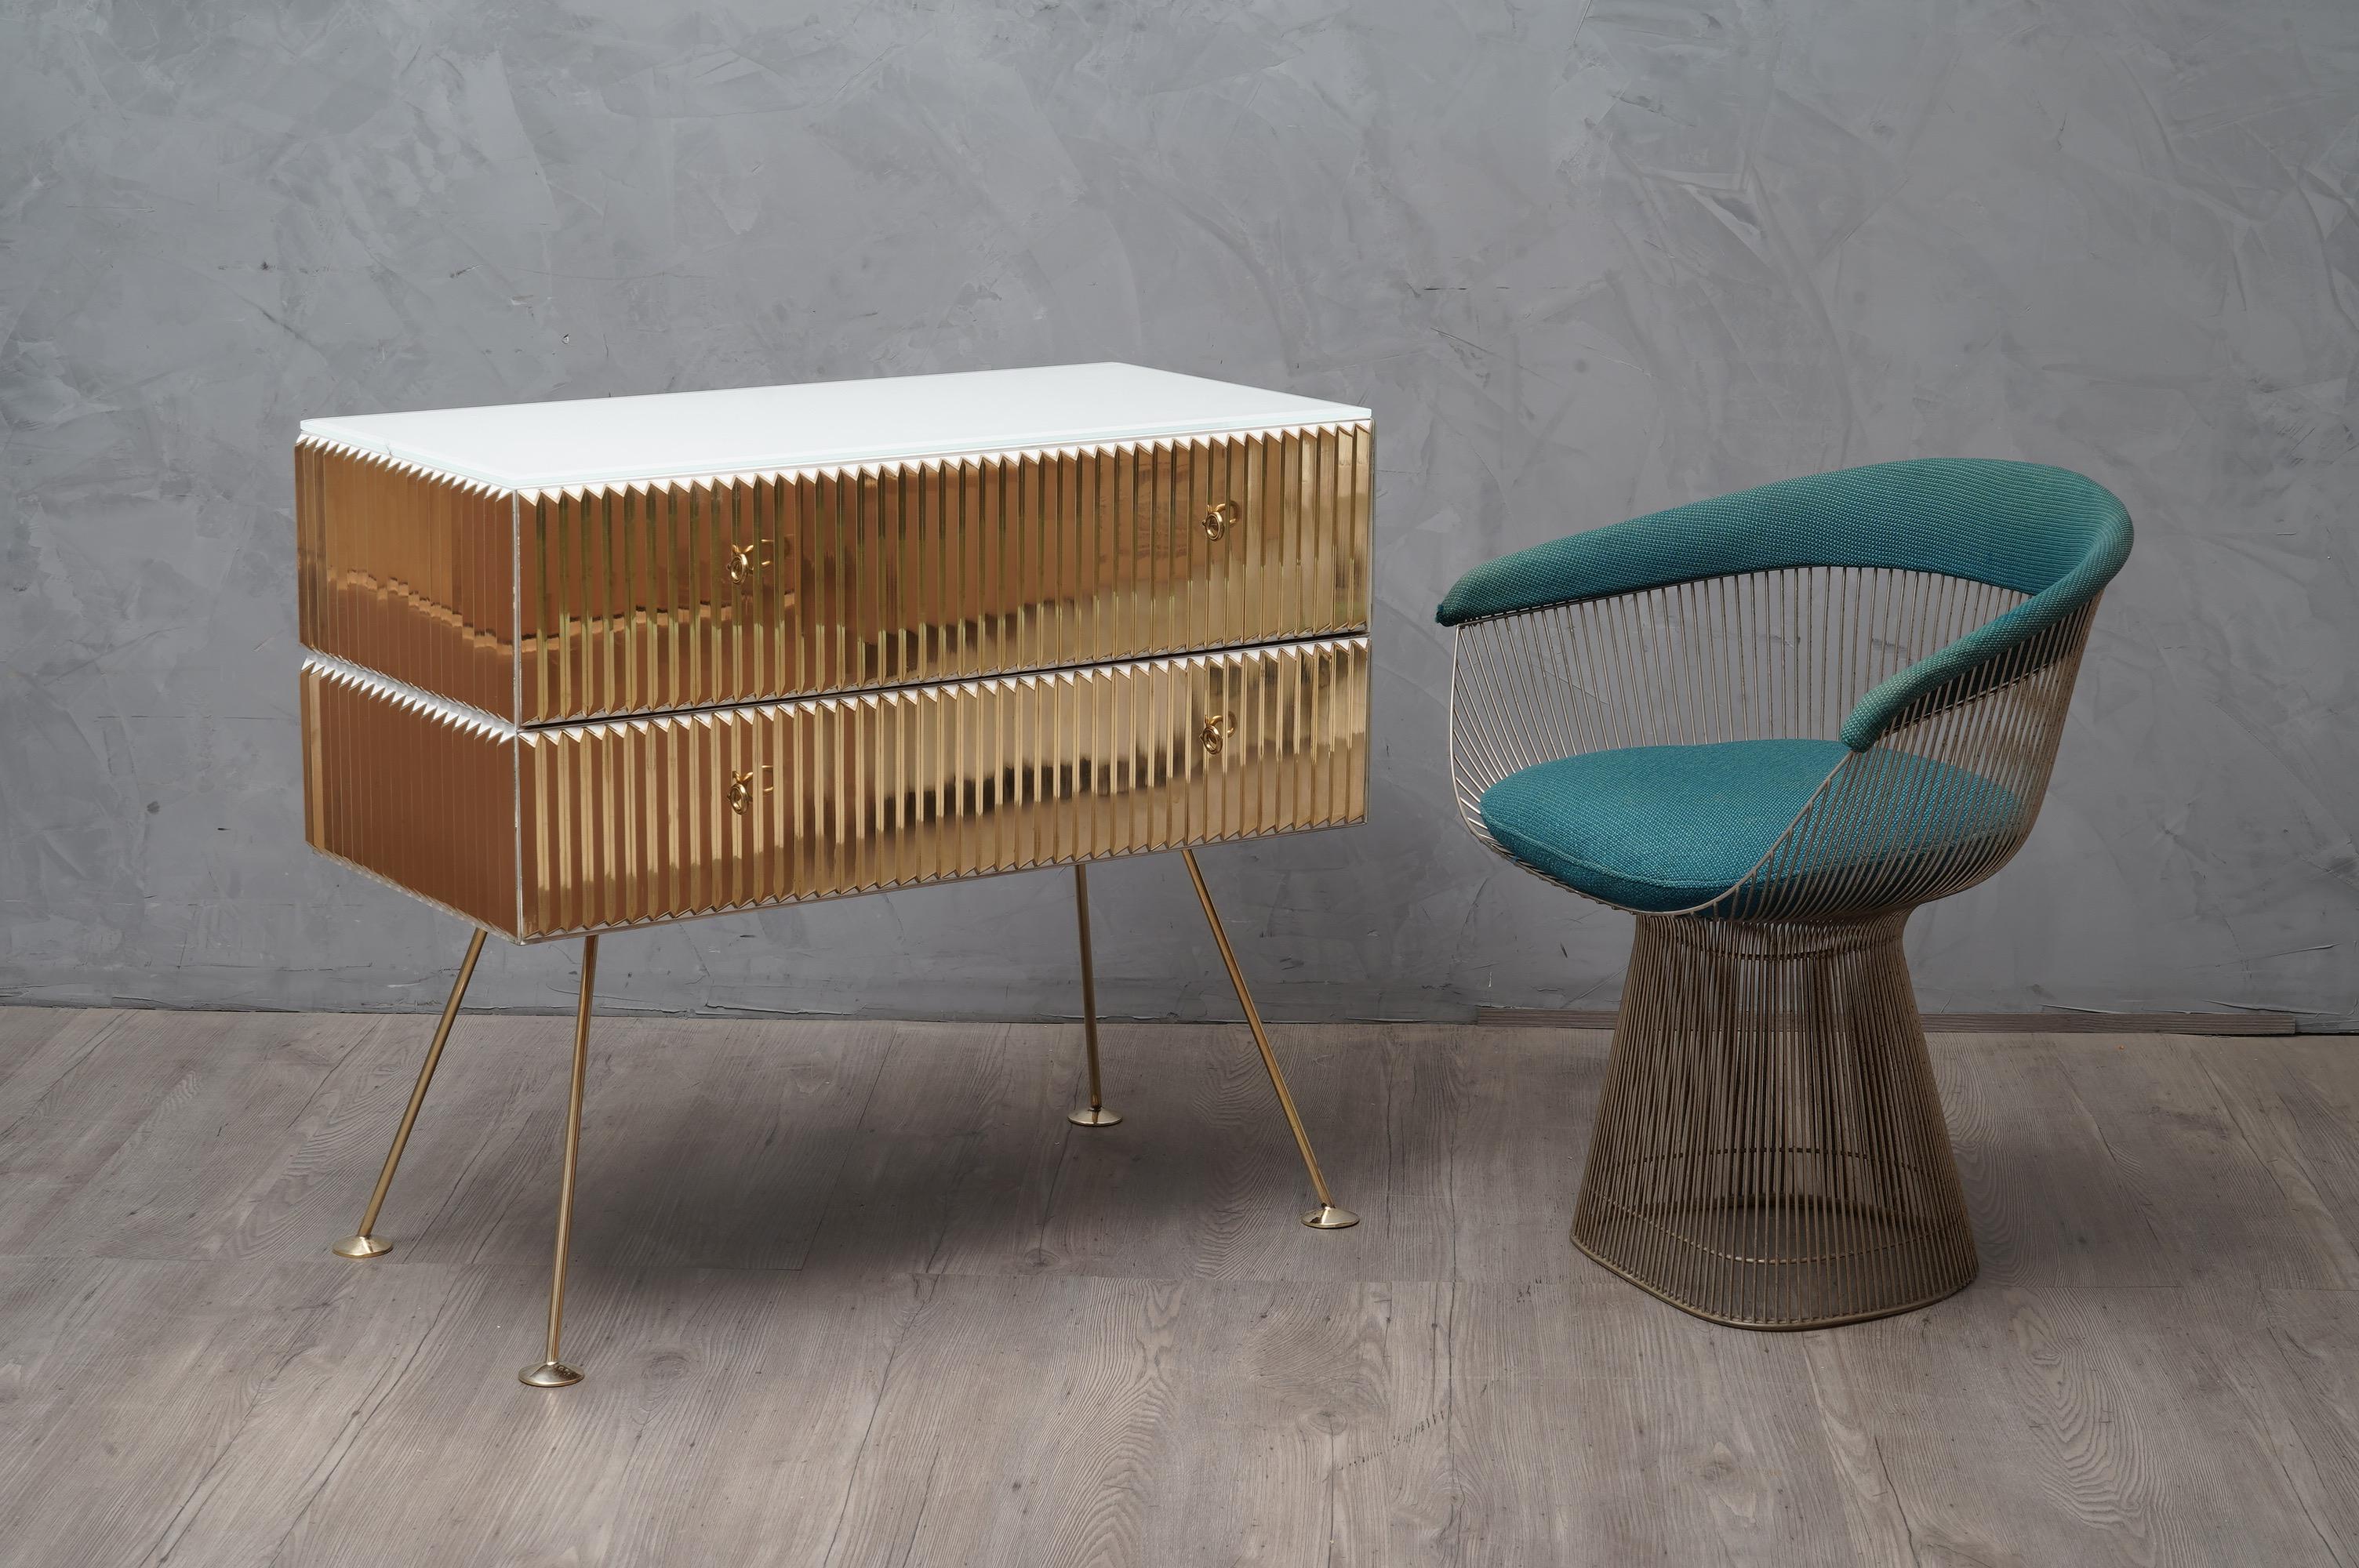 Thrilling and elegant vintage chest of drawers, designed with precious materials such as brass and glass. Unique and original object of its kind.

The dresser consists of a wooden body with two drawers, on which triangular shaped brass profiles